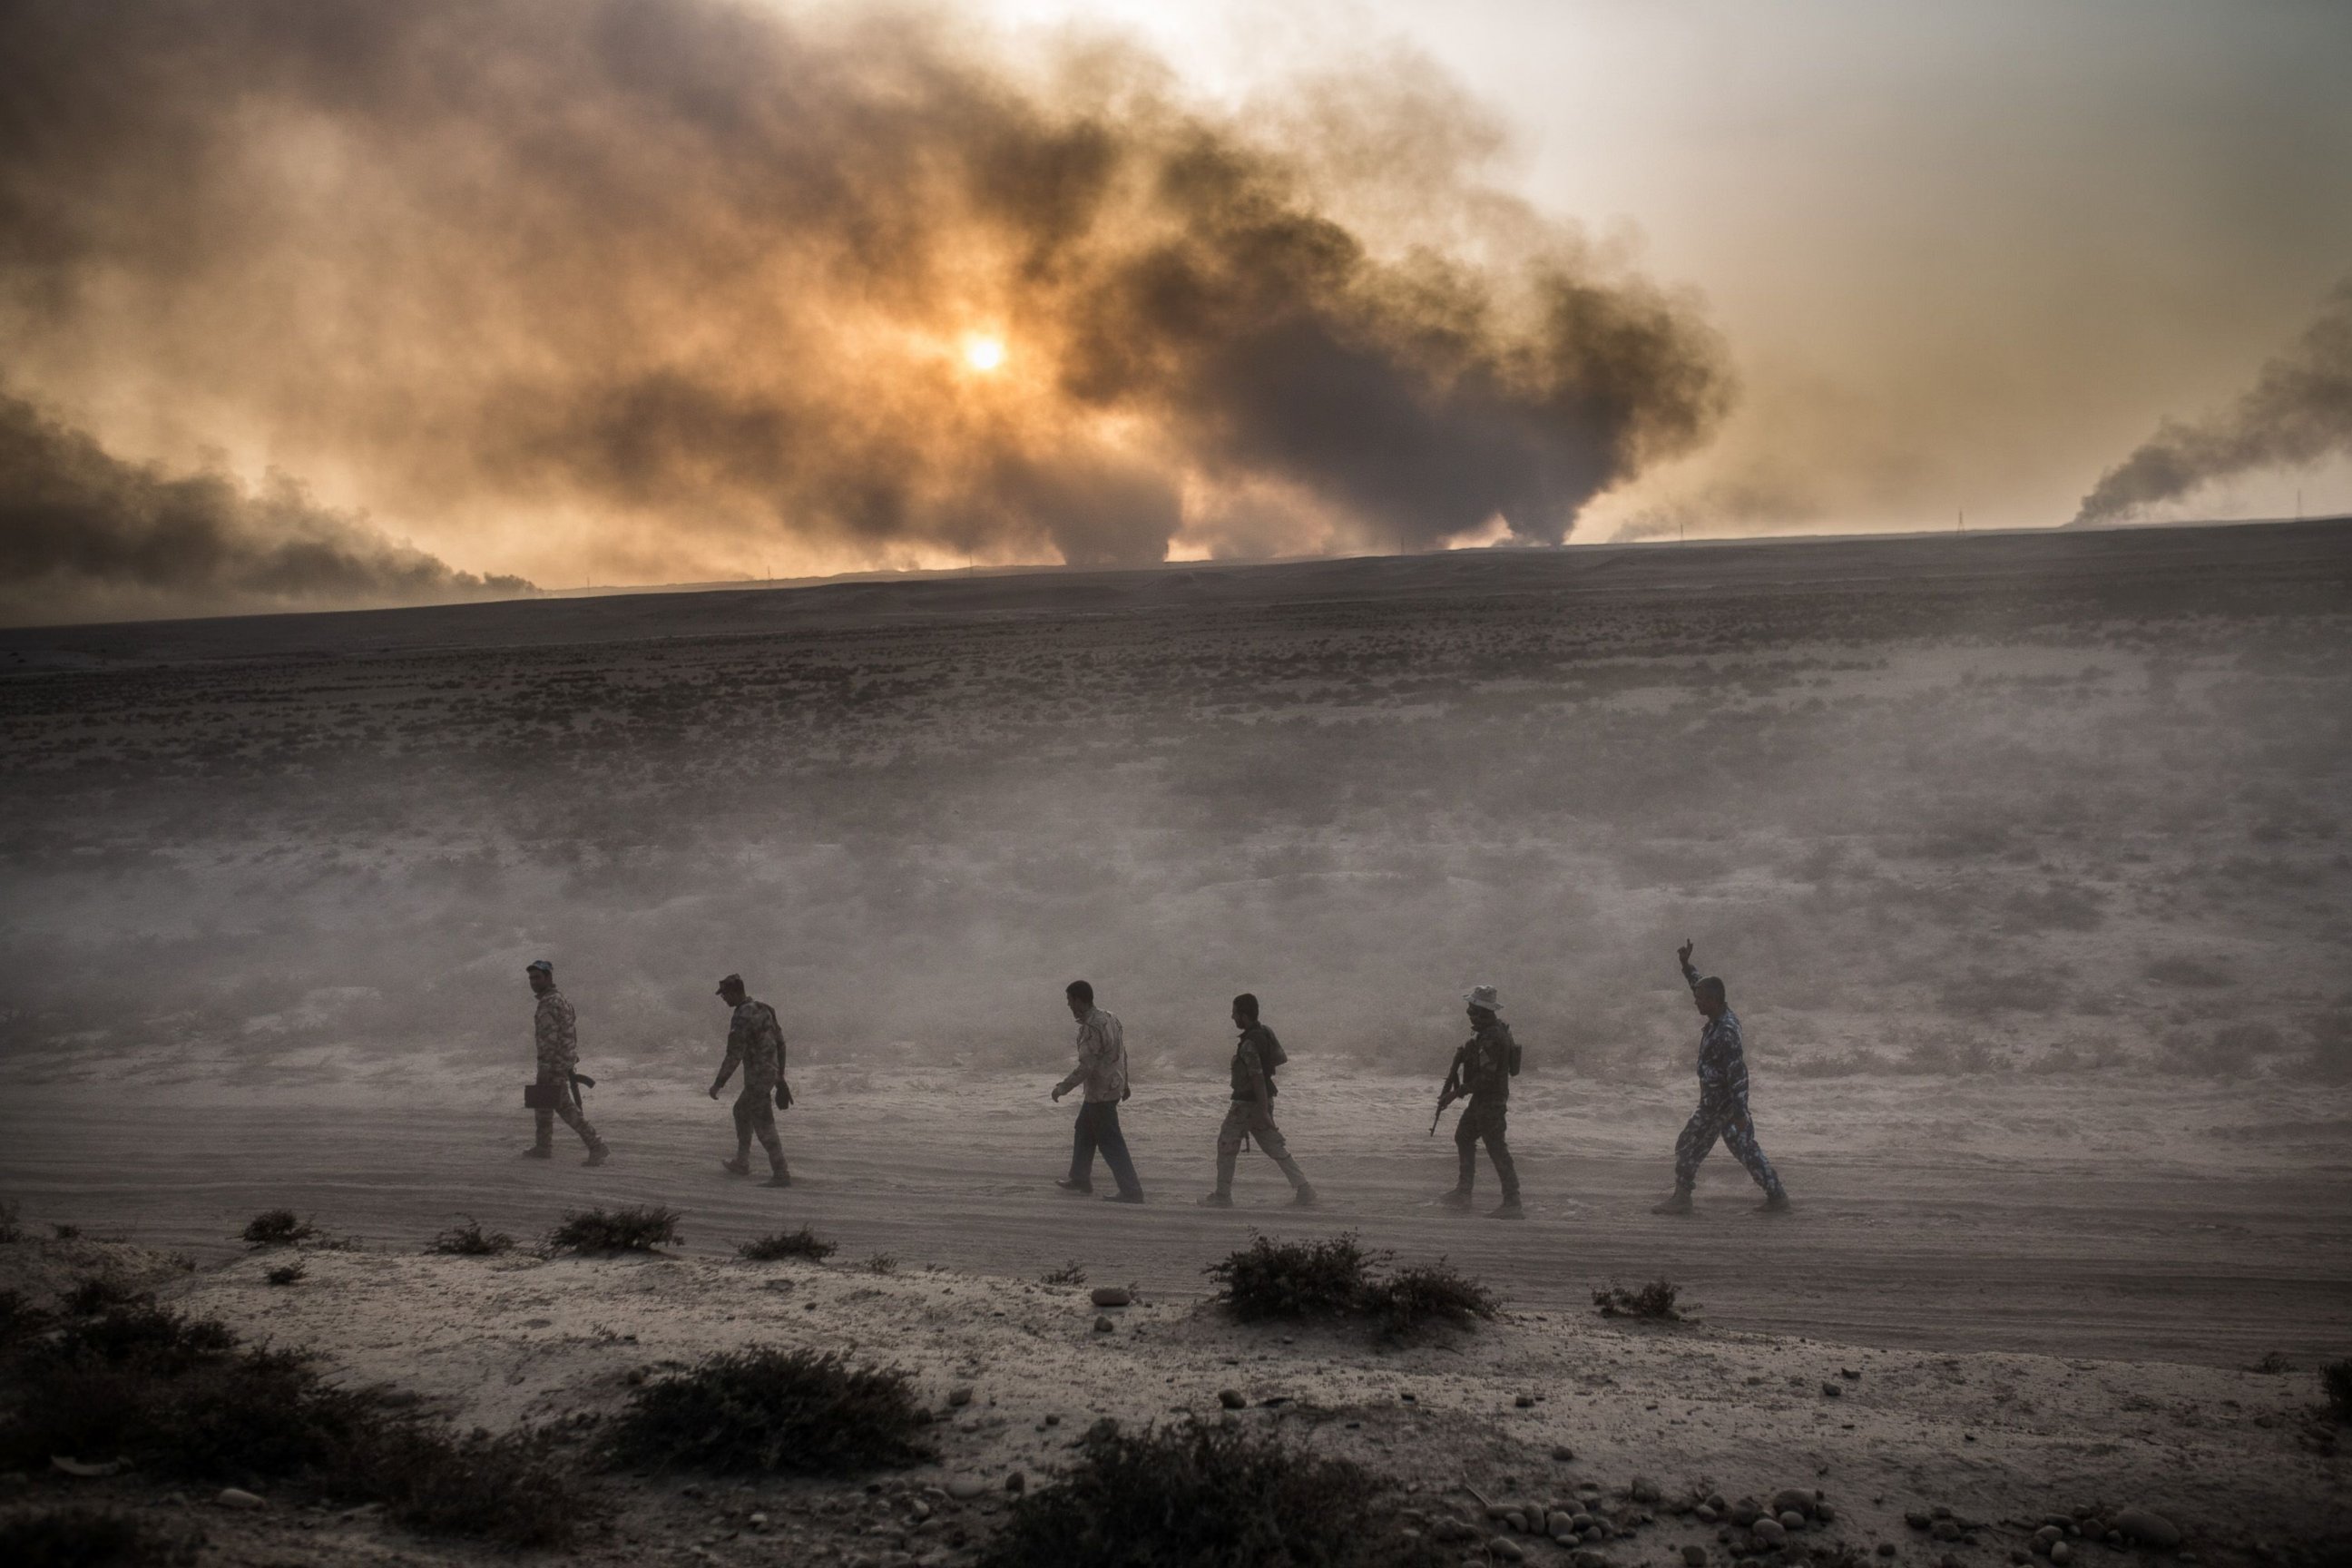 PHOTO: Iraqi soldiers walk on a road as smoke billows from the Qayyarah area, some 60 kilometers (35 miles) south of Mosul, Oct. 19, 2016, during an operation against the Islamic State to retake the main hub city.